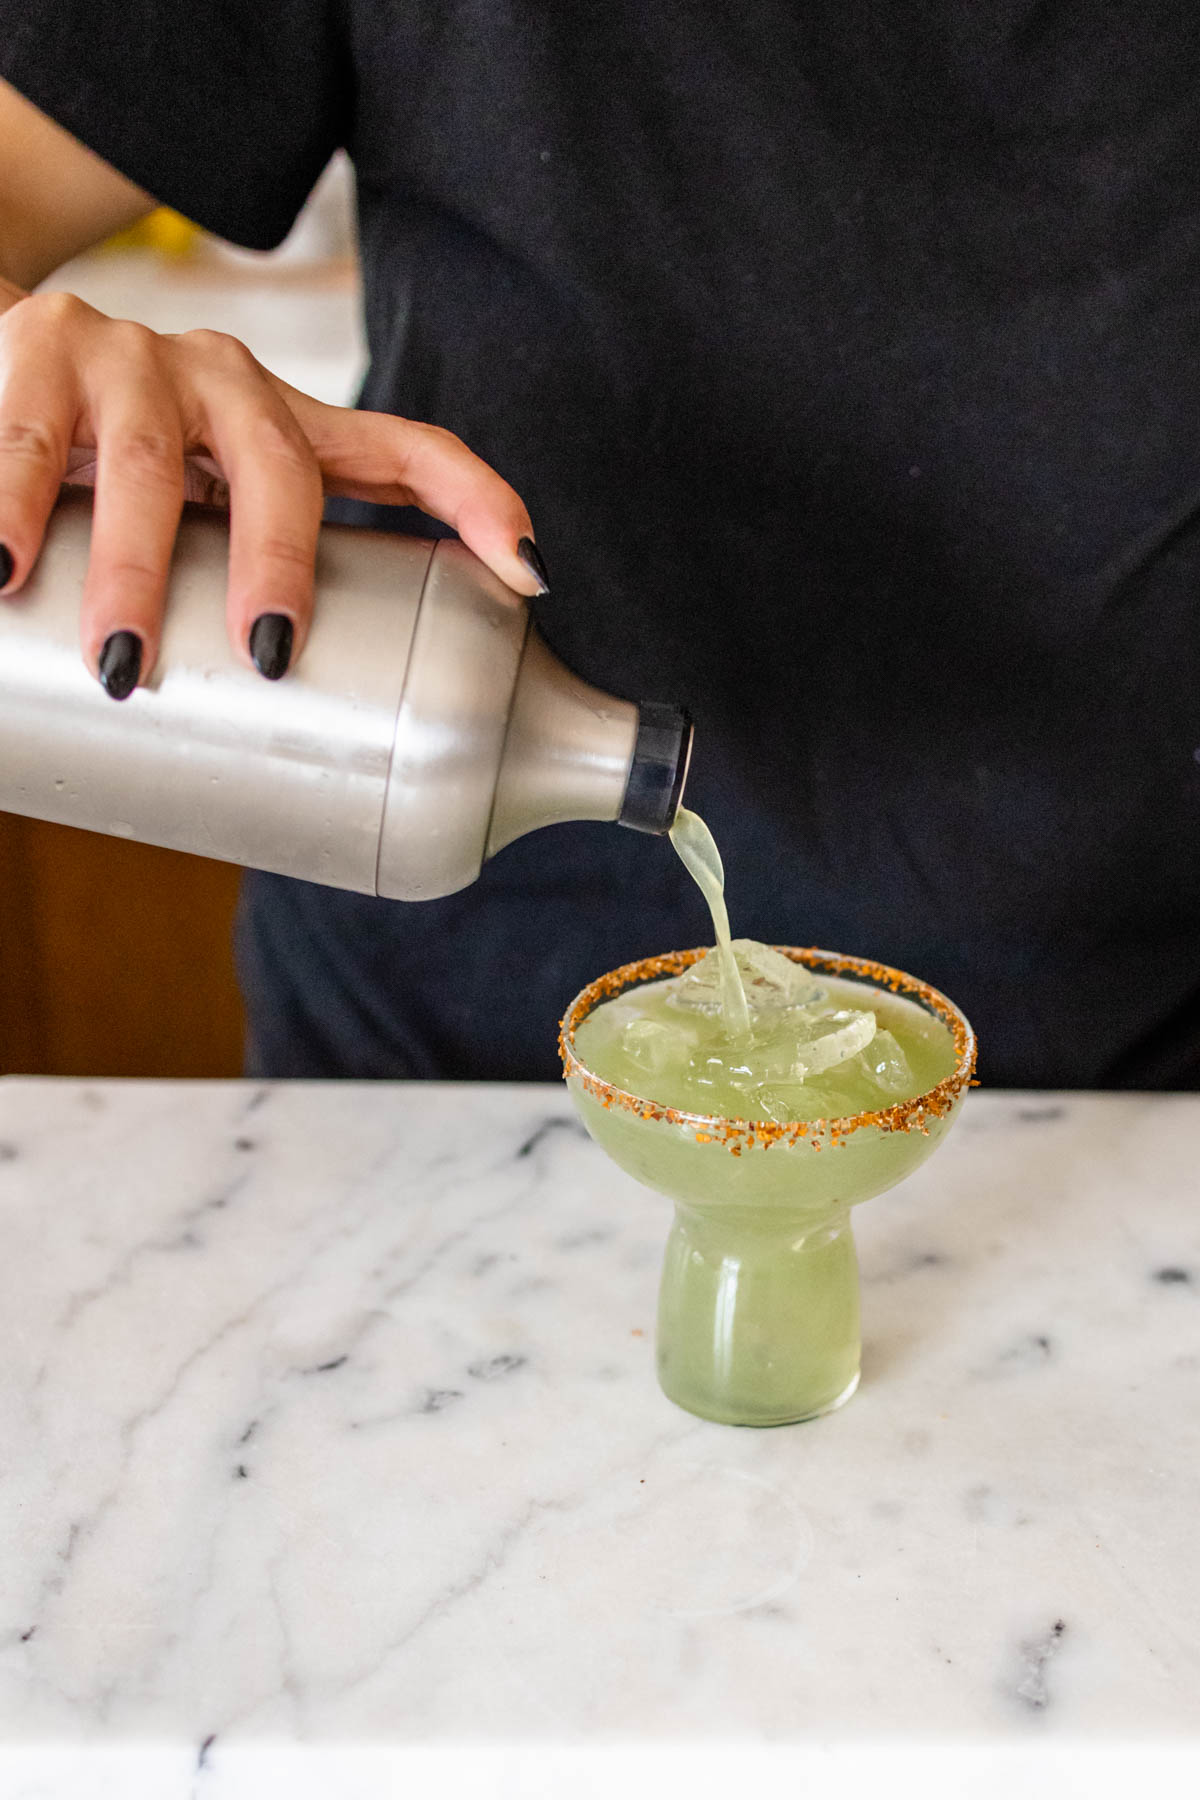 Woman pouring a green juice margarita into a stemless wine glass from a cocktail shaker.